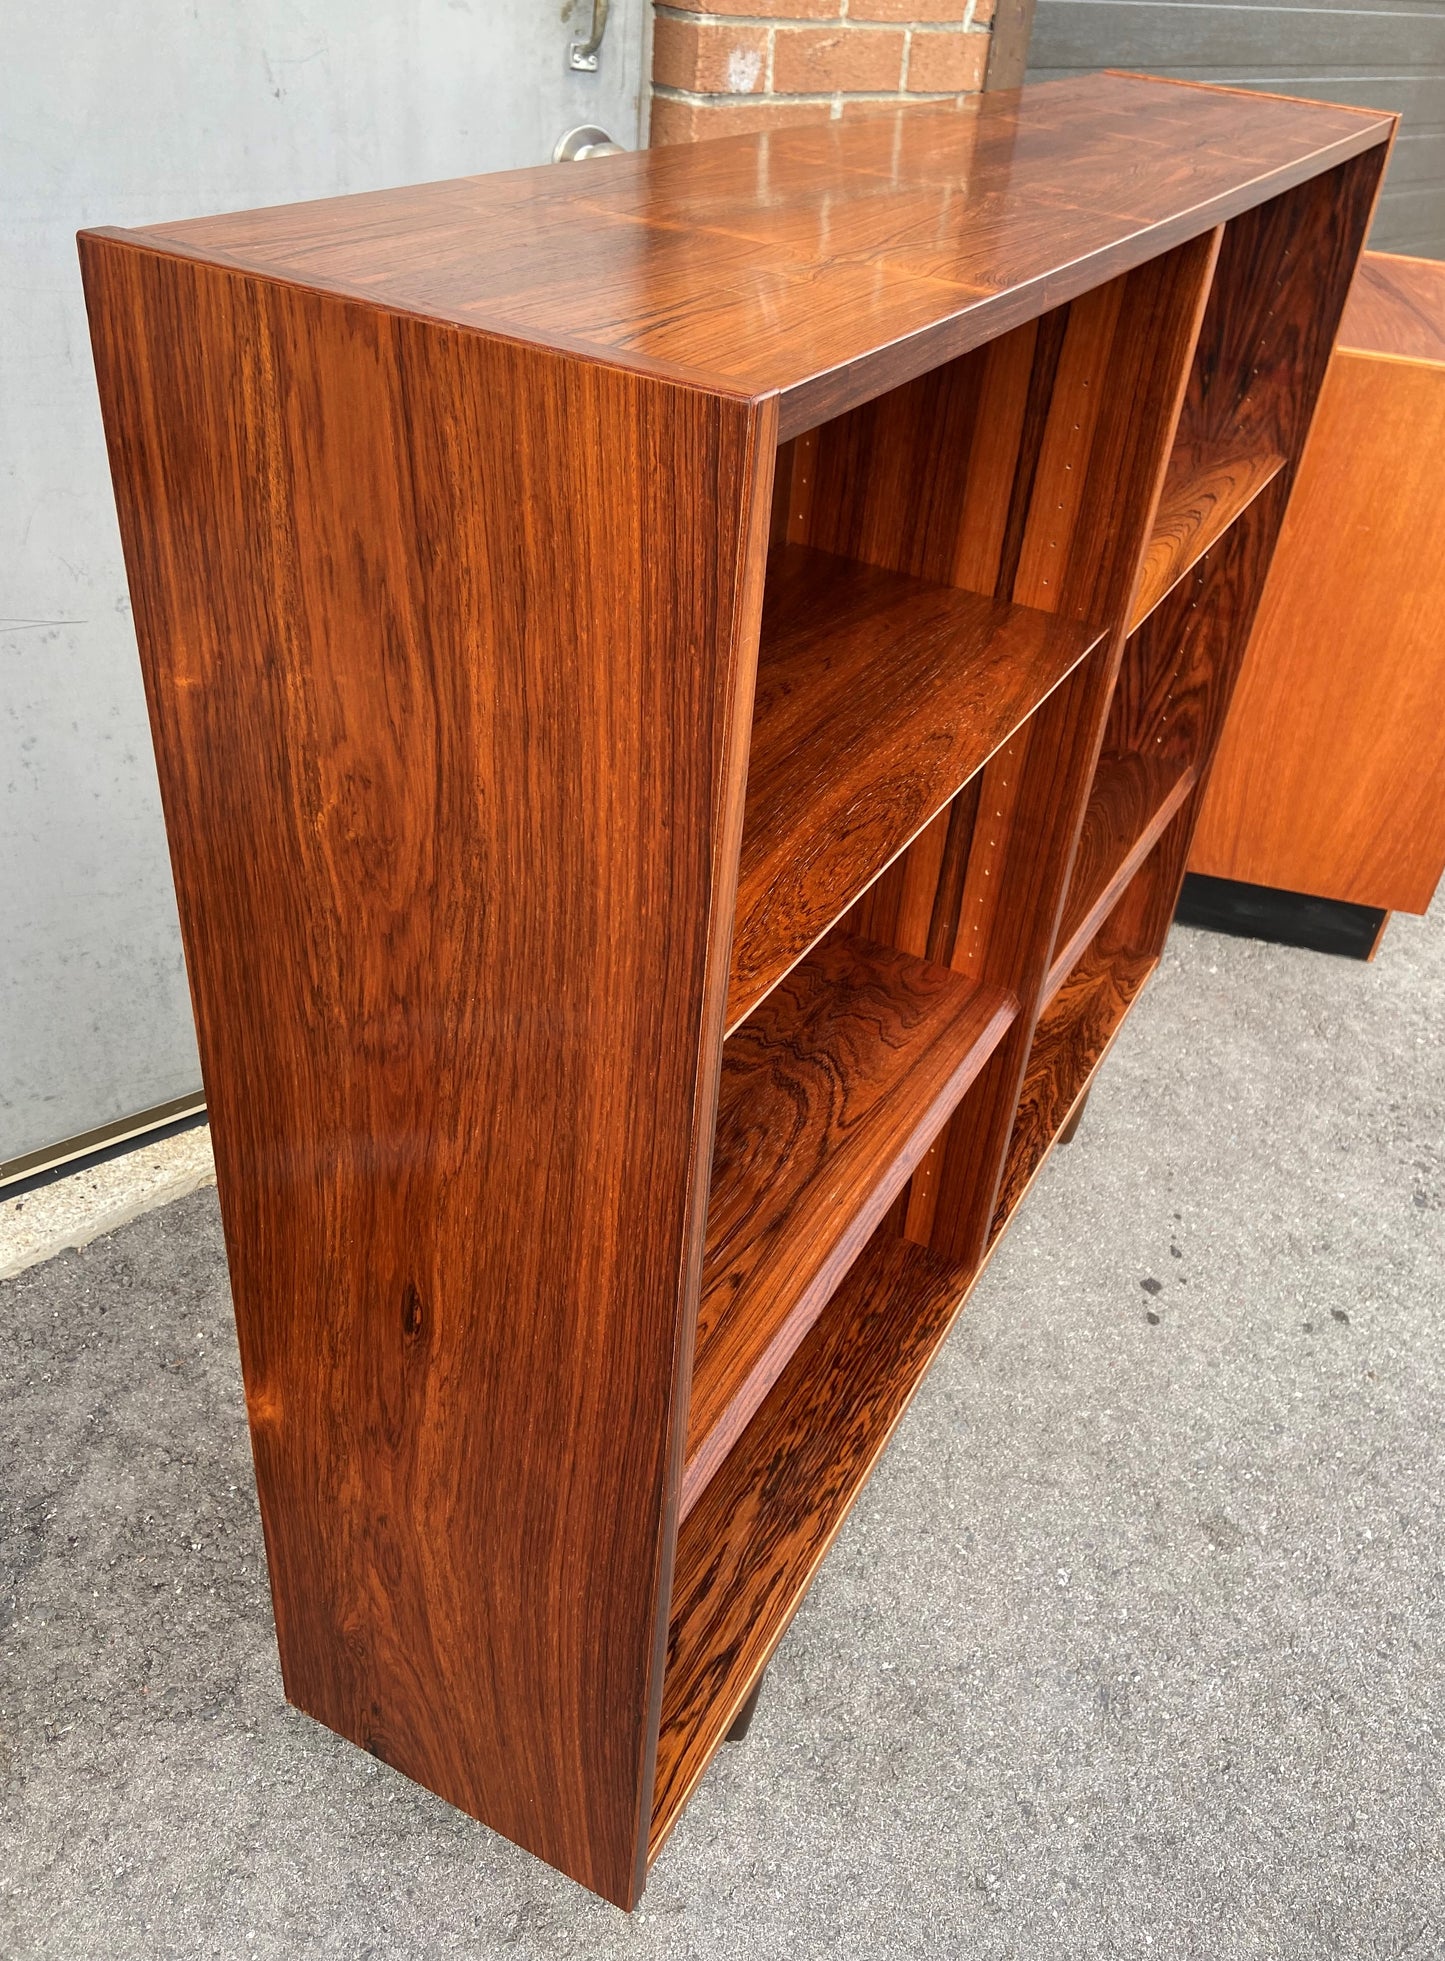 RESTORED Danish Mid Century Modern Rosewood Bookcase 54.5" by Poul Hundevad